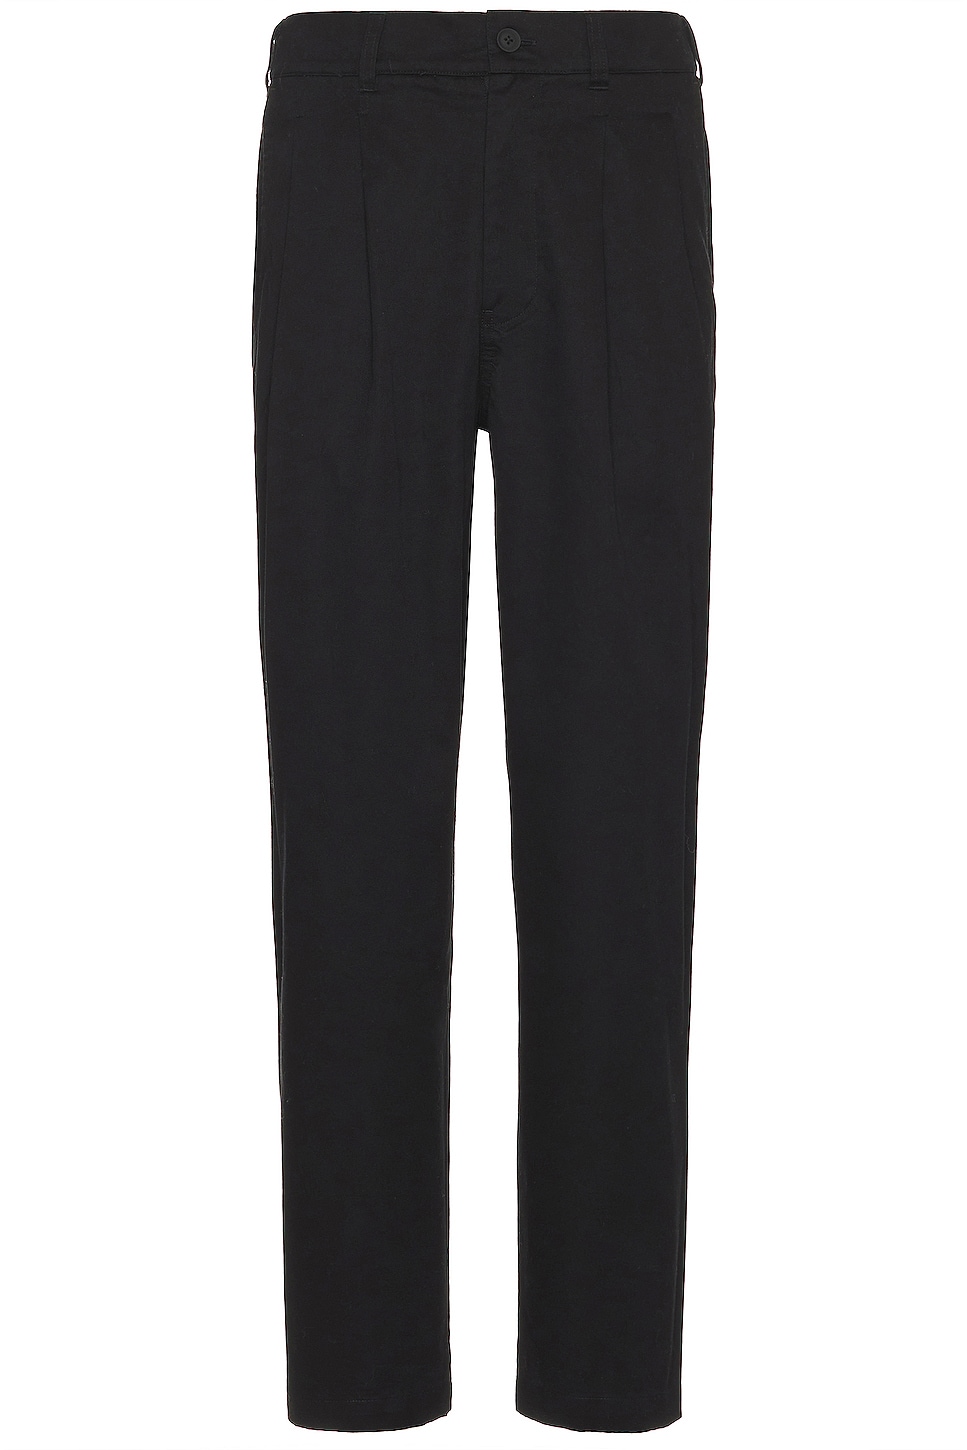 Double Pleated Chino Pant in Black